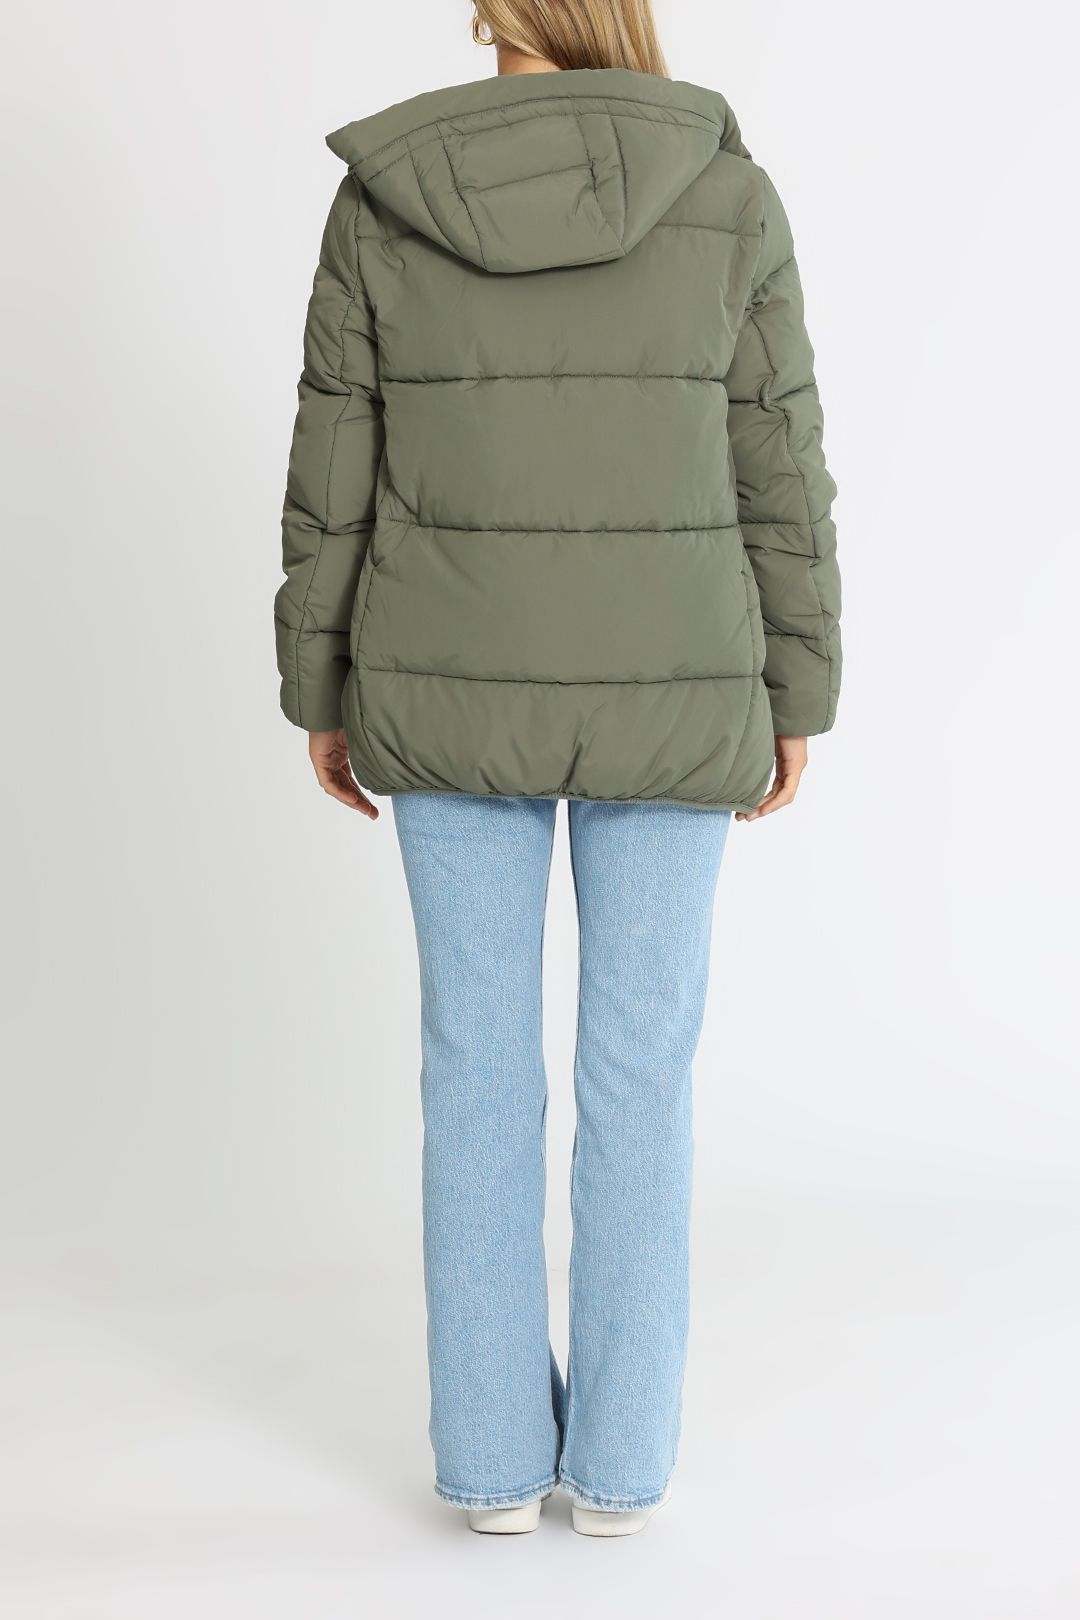 Hire Full Count Puffer Jacket in Four Leaf Clover